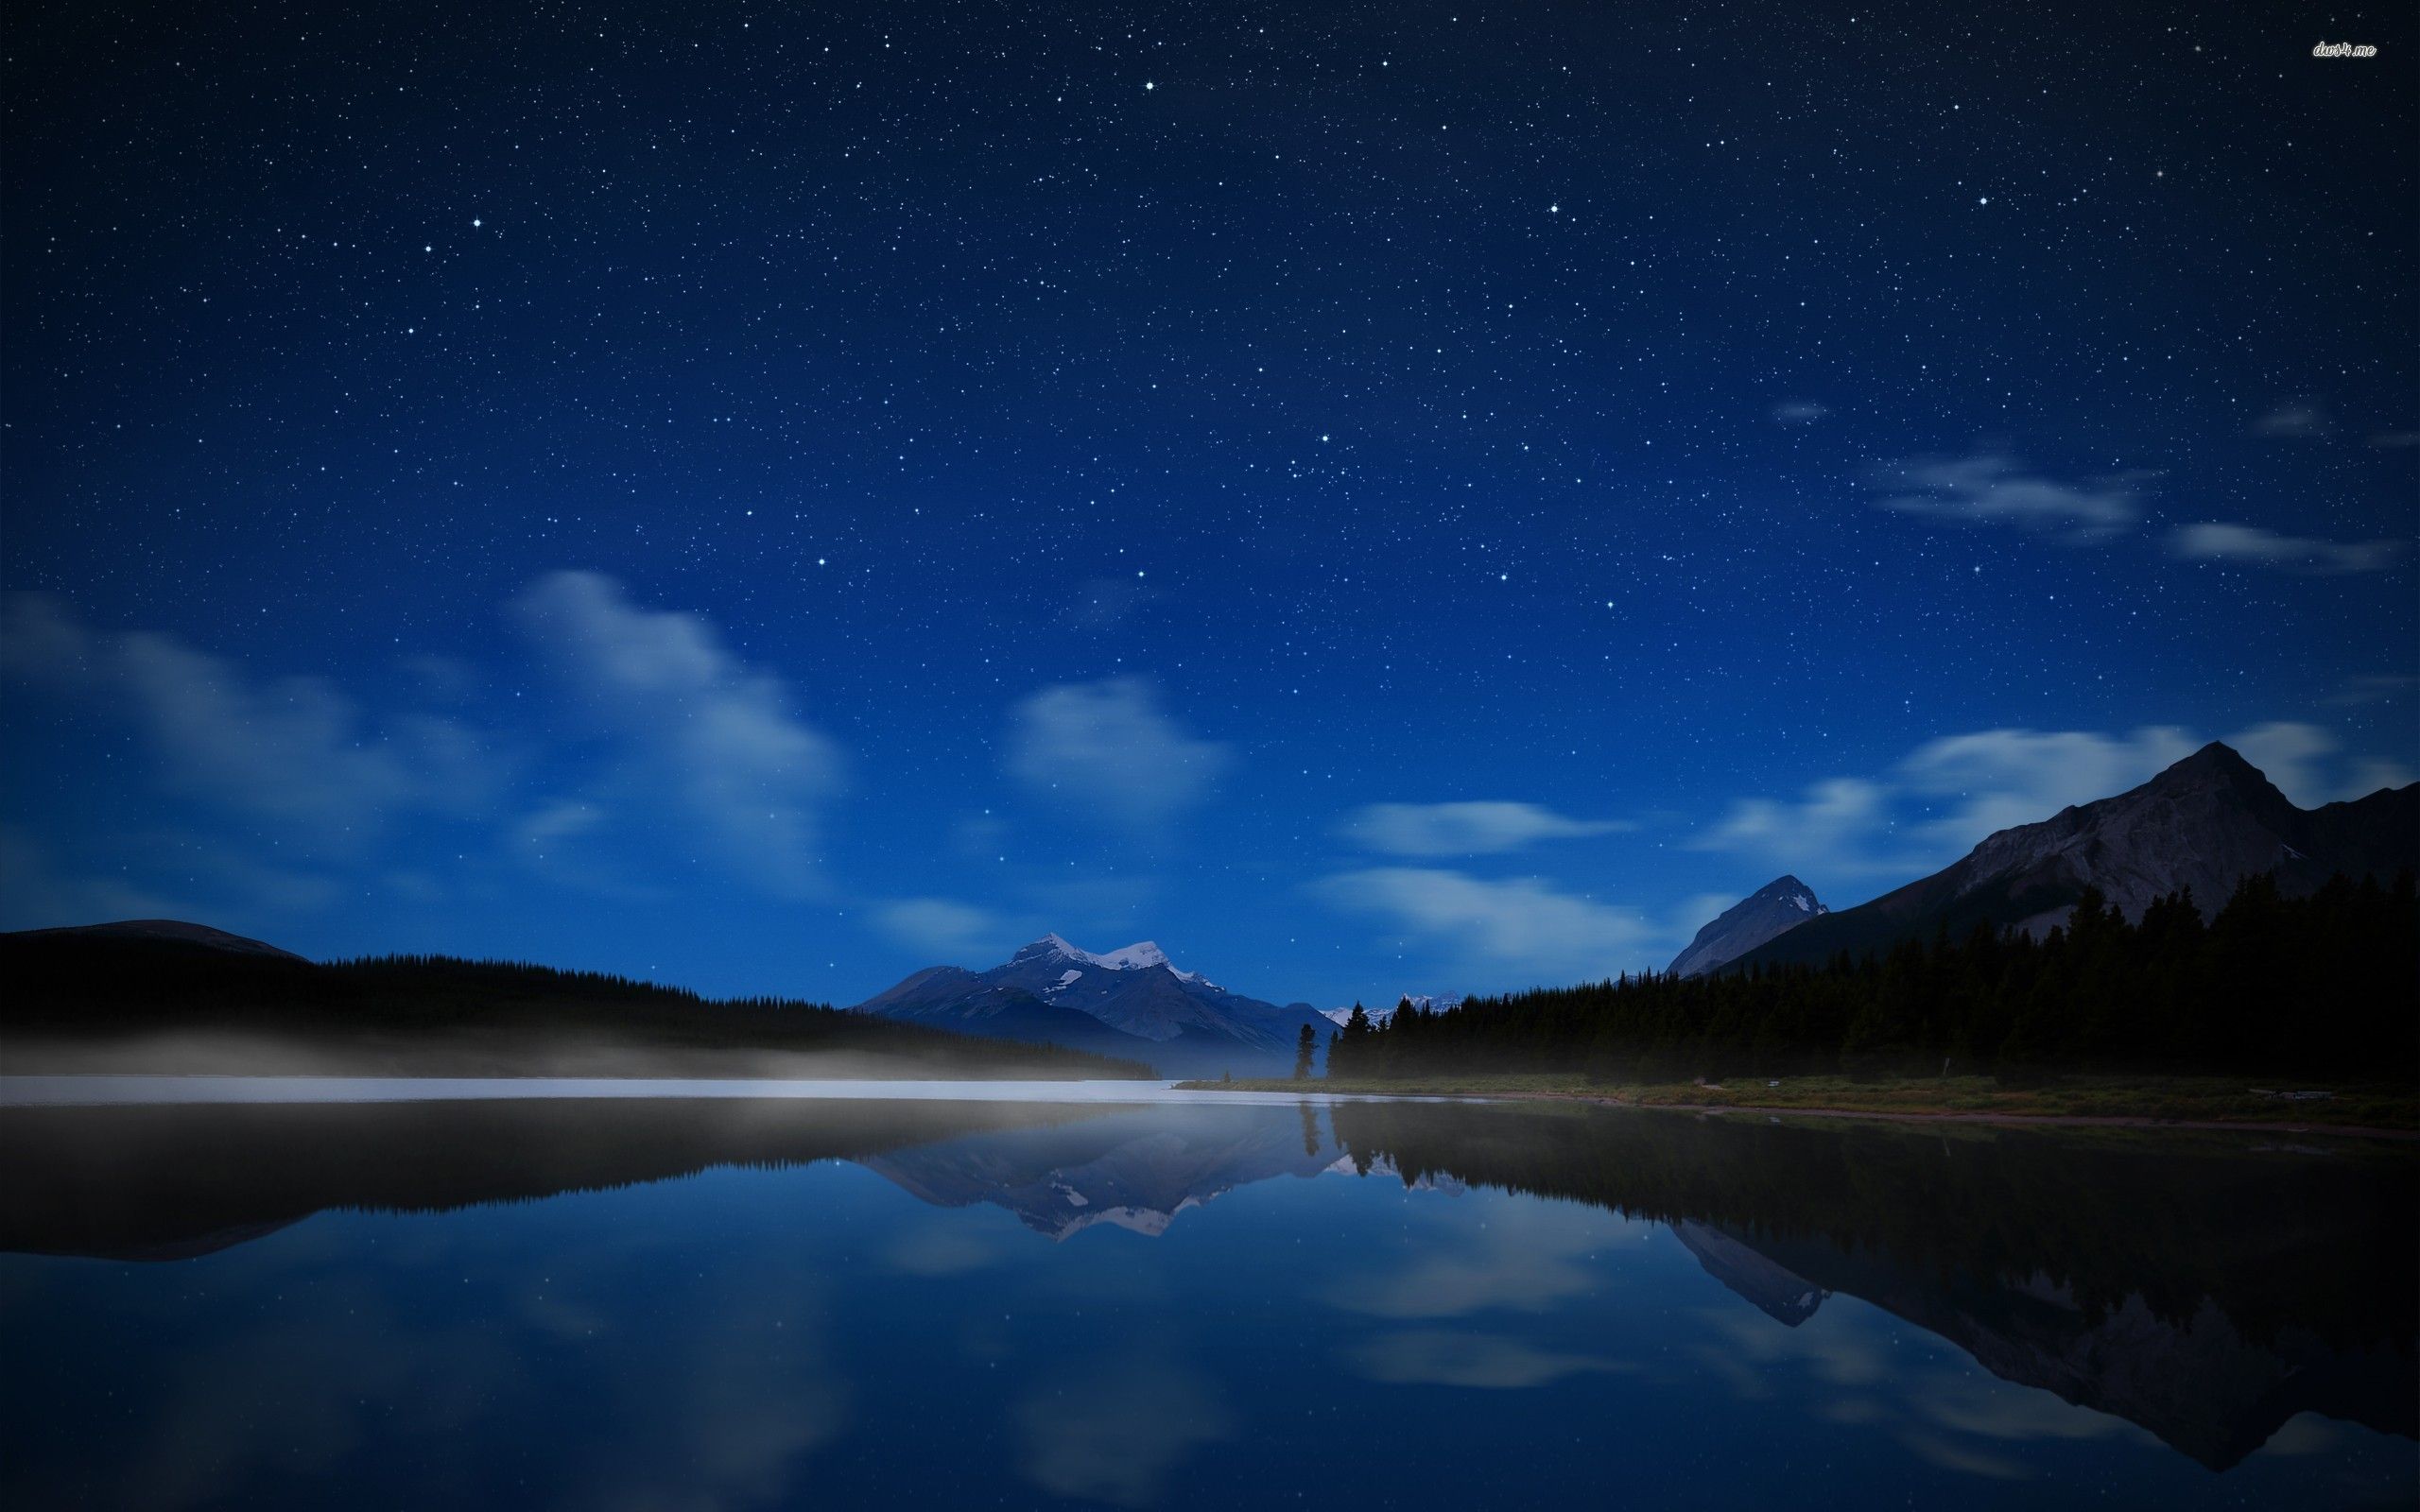 Star filled night sky wallpaper - Nature wallpapers -